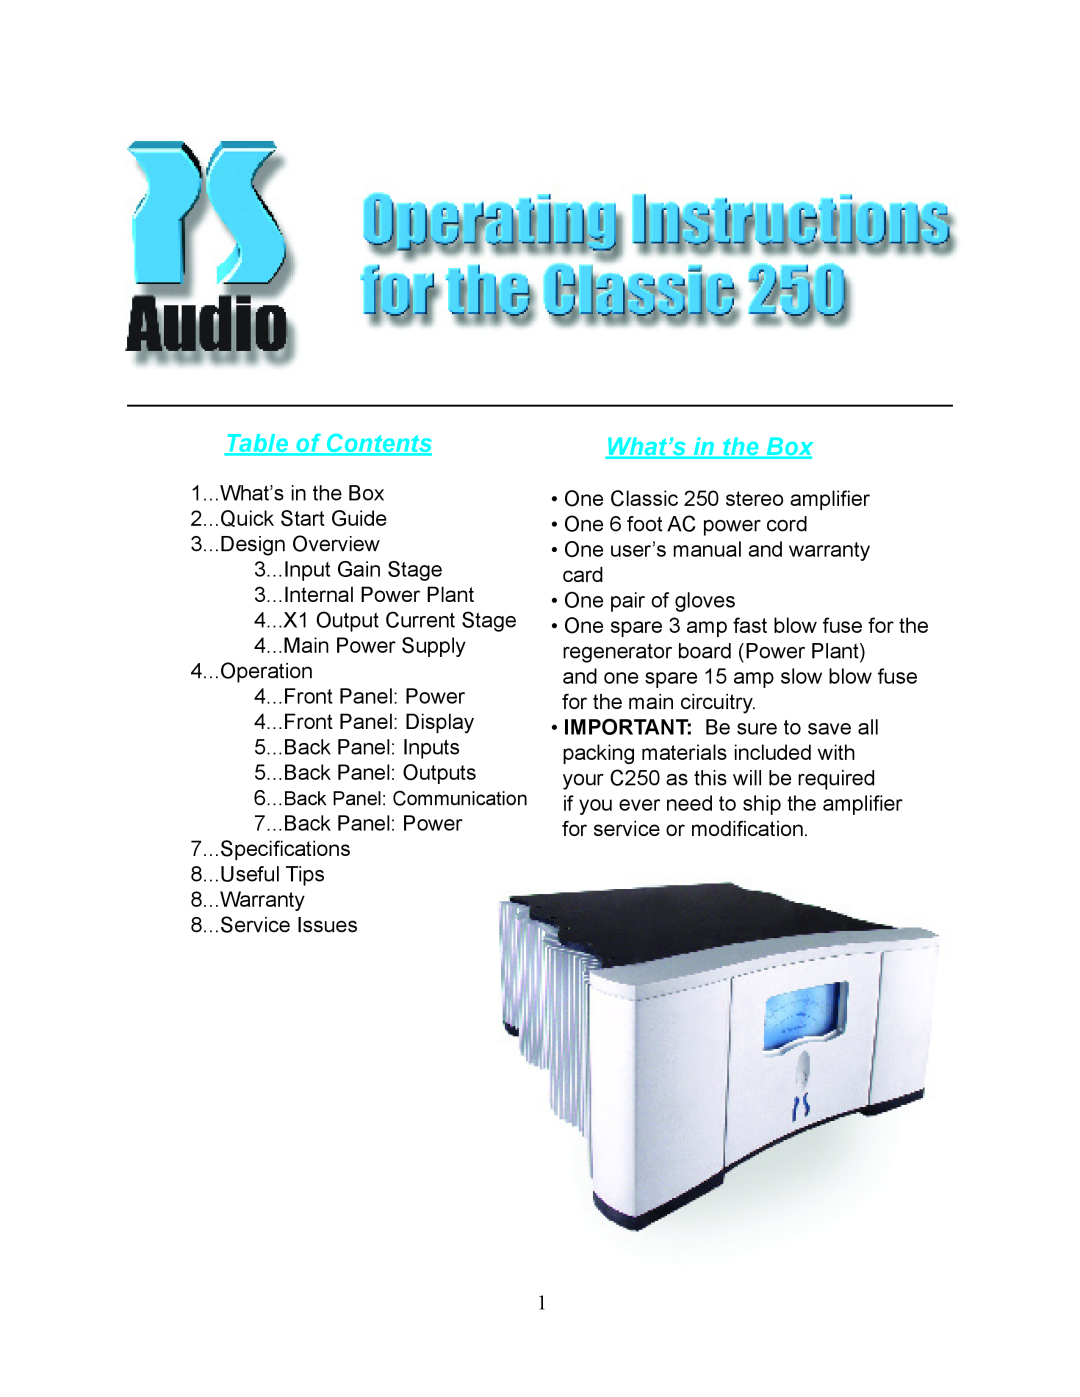 PS Audio C250 quick start Table of Contents, What’s in the Box 